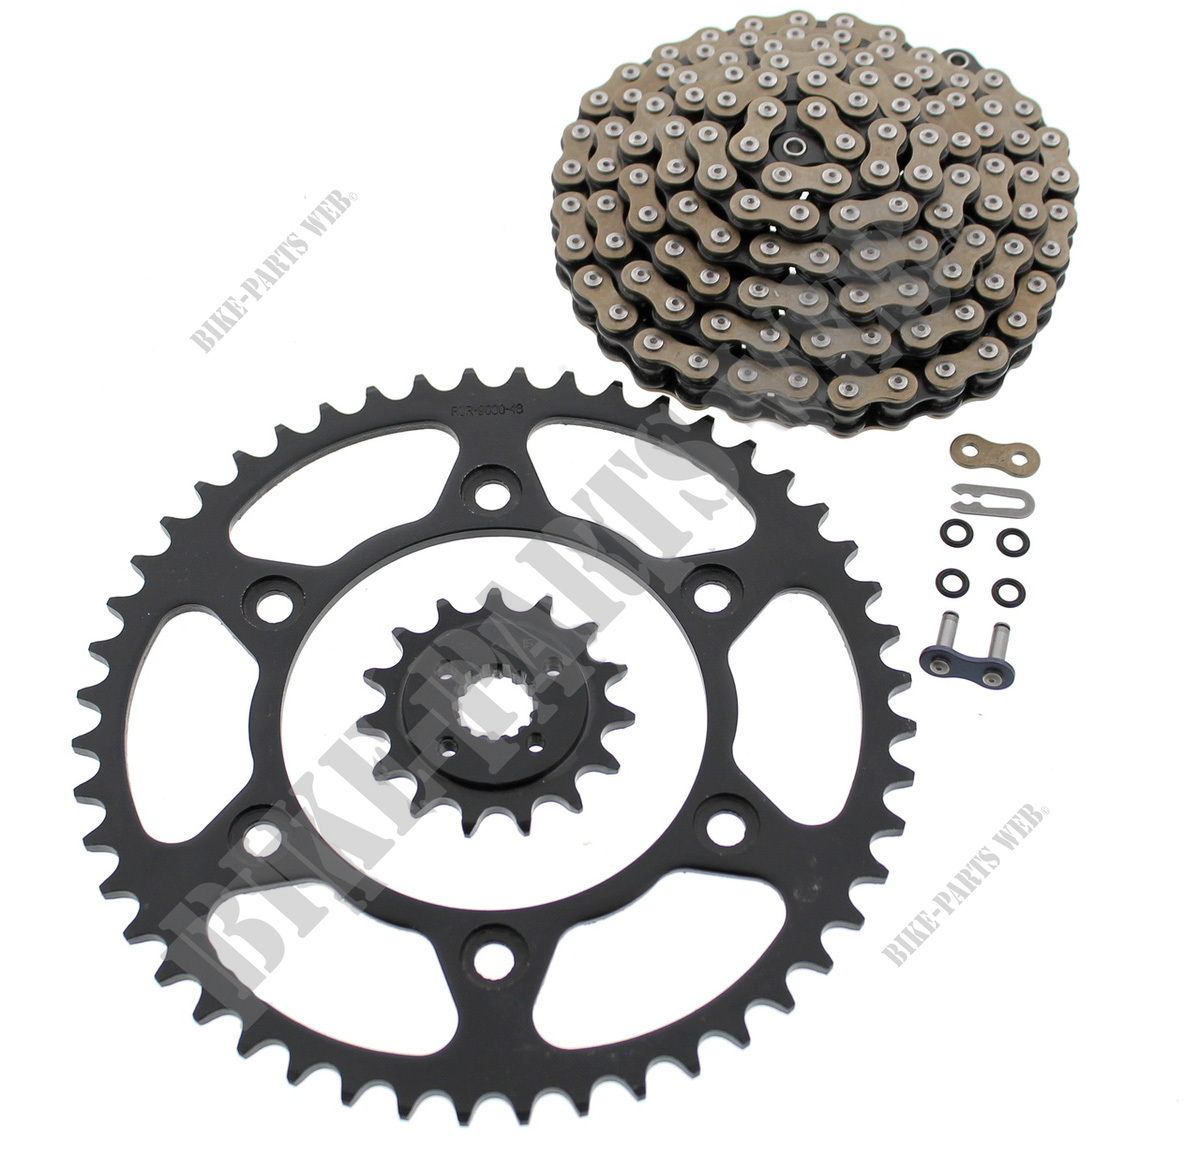 Transmission, chain kit reinforced X-ring XR600R 1985 to 1990  50 teeth - 